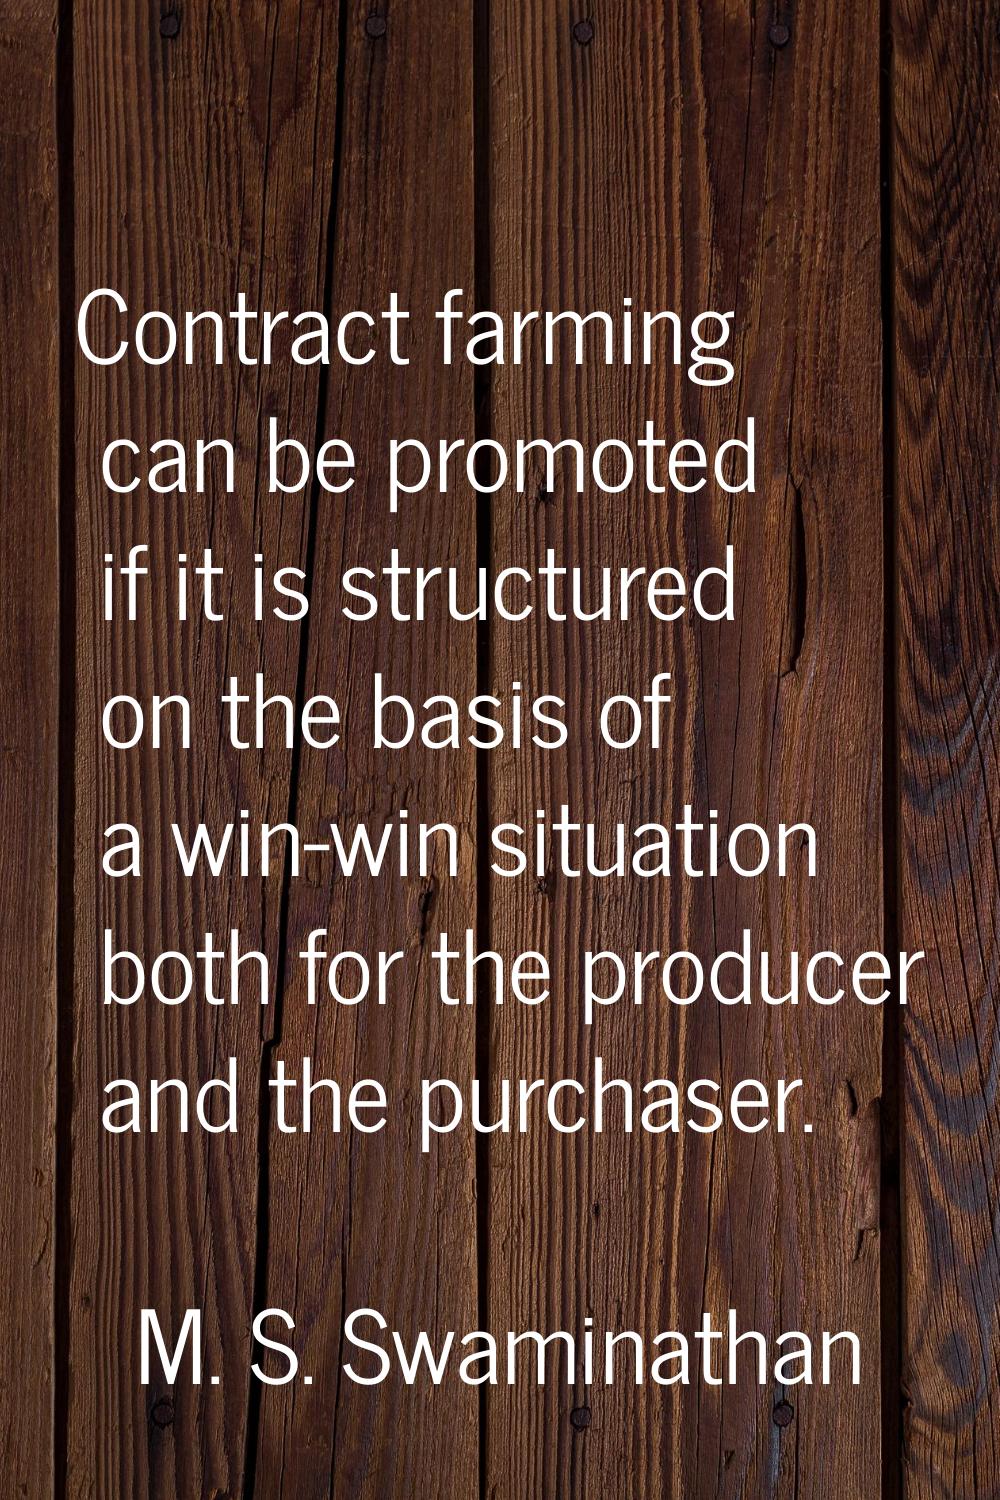 Contract farming can be promoted if it is structured on the basis of a win-win situation both for t